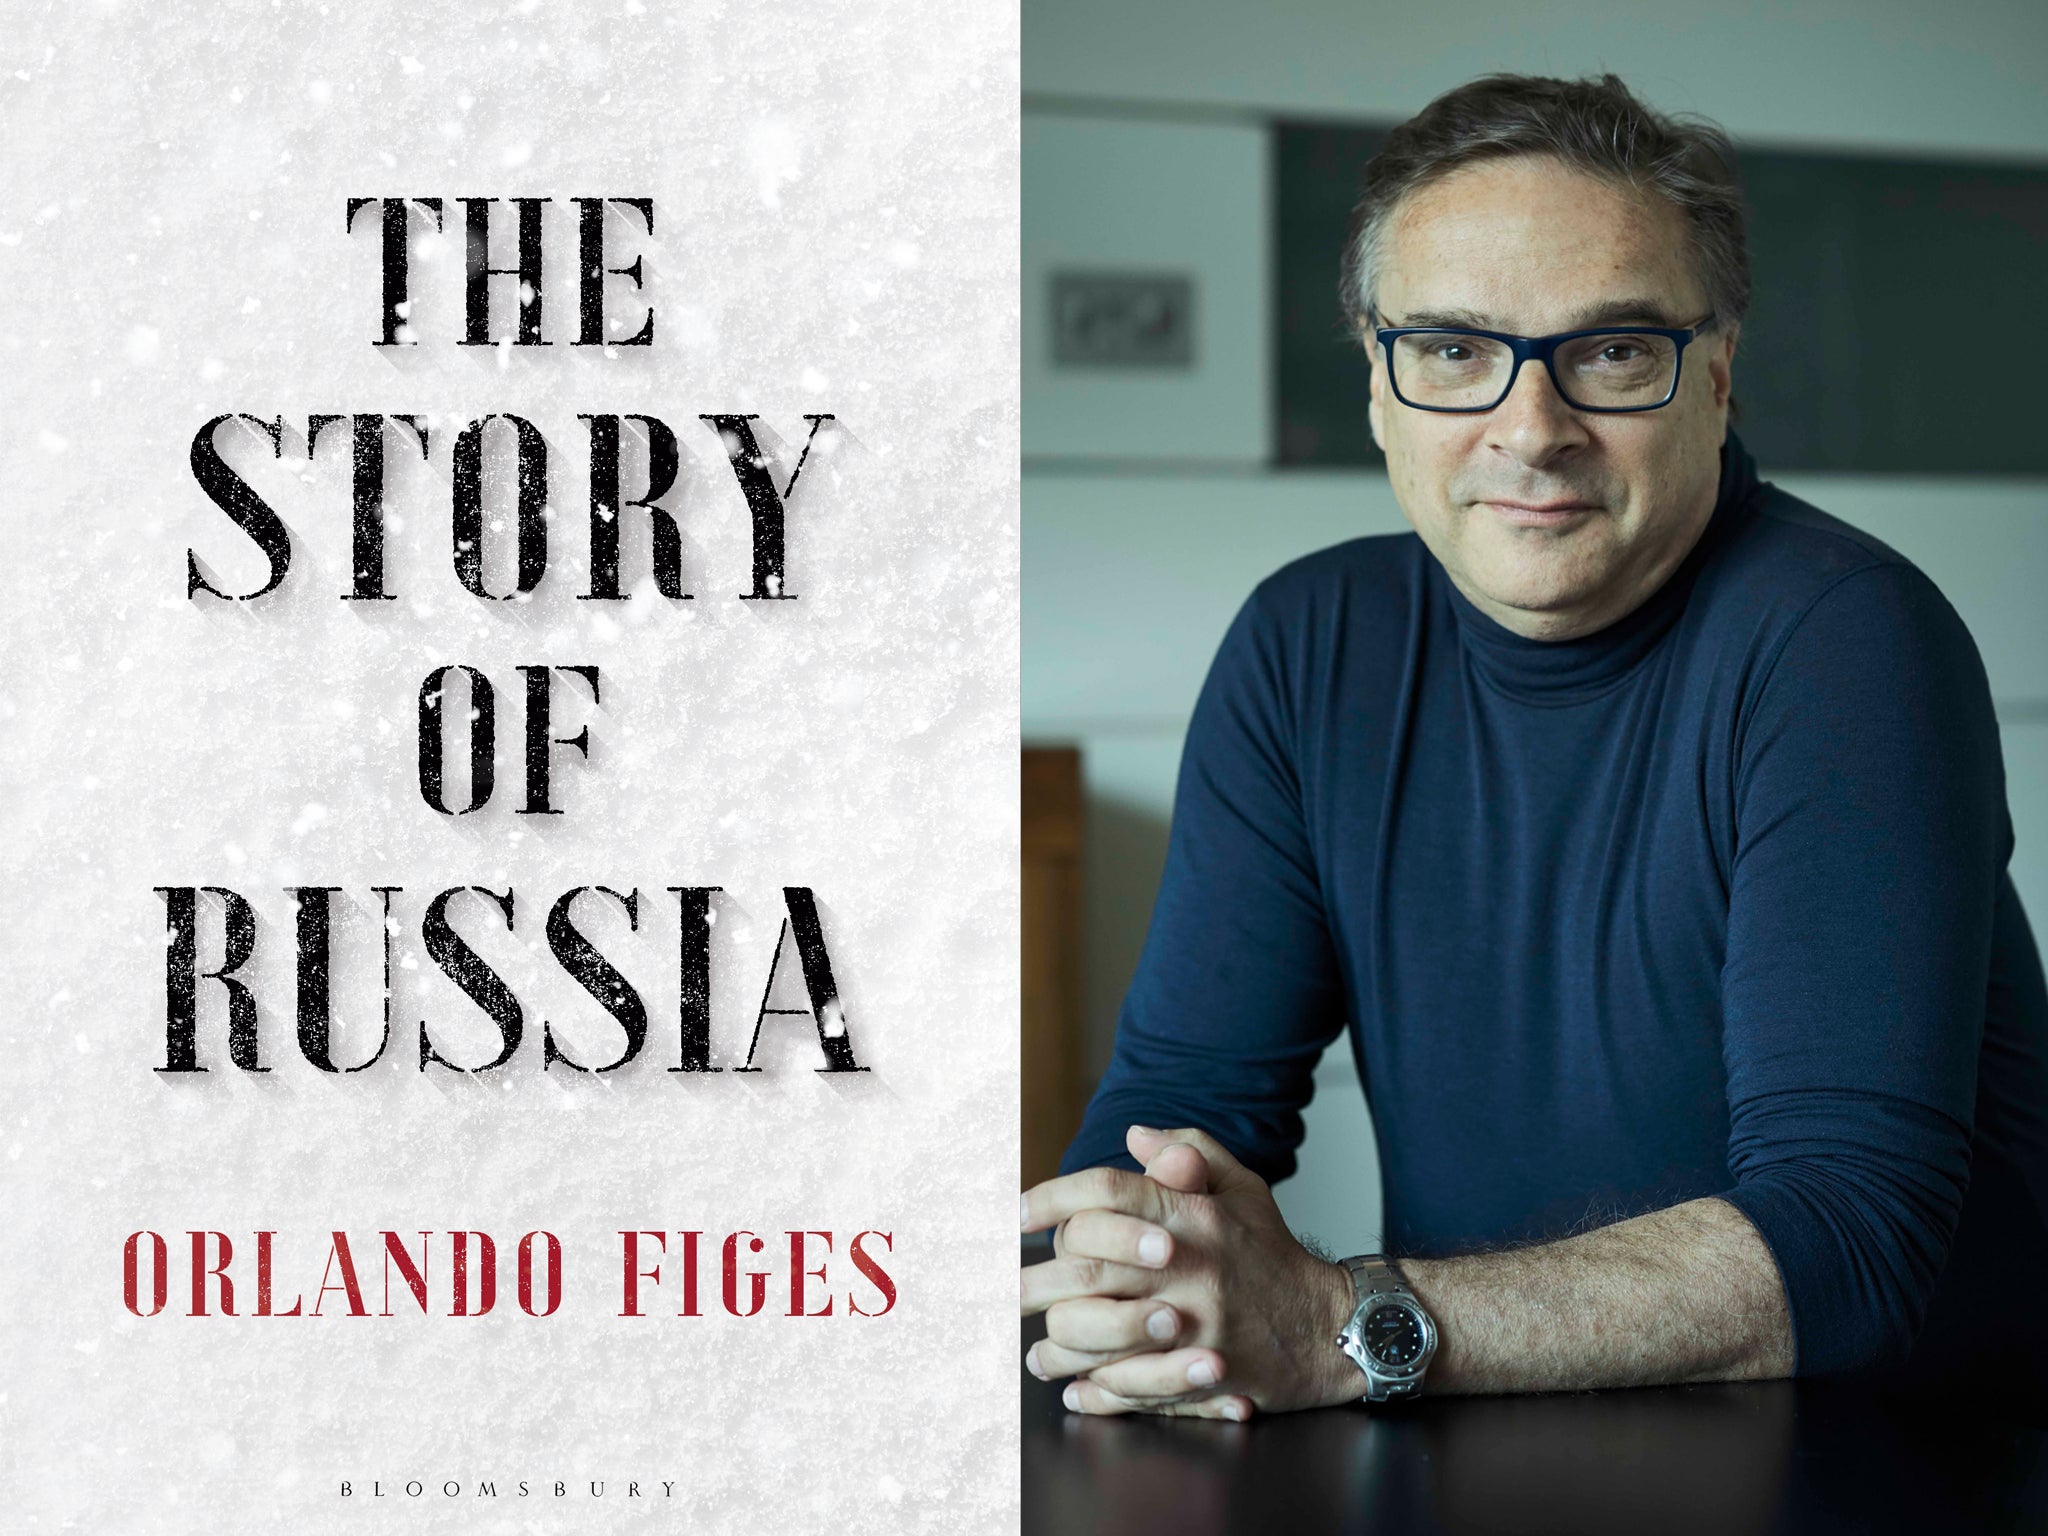 Orlando Figes offers a valuable overview of how Ukraine has become a battlefield for a ‘clash of civilisations’ between Russia and the West